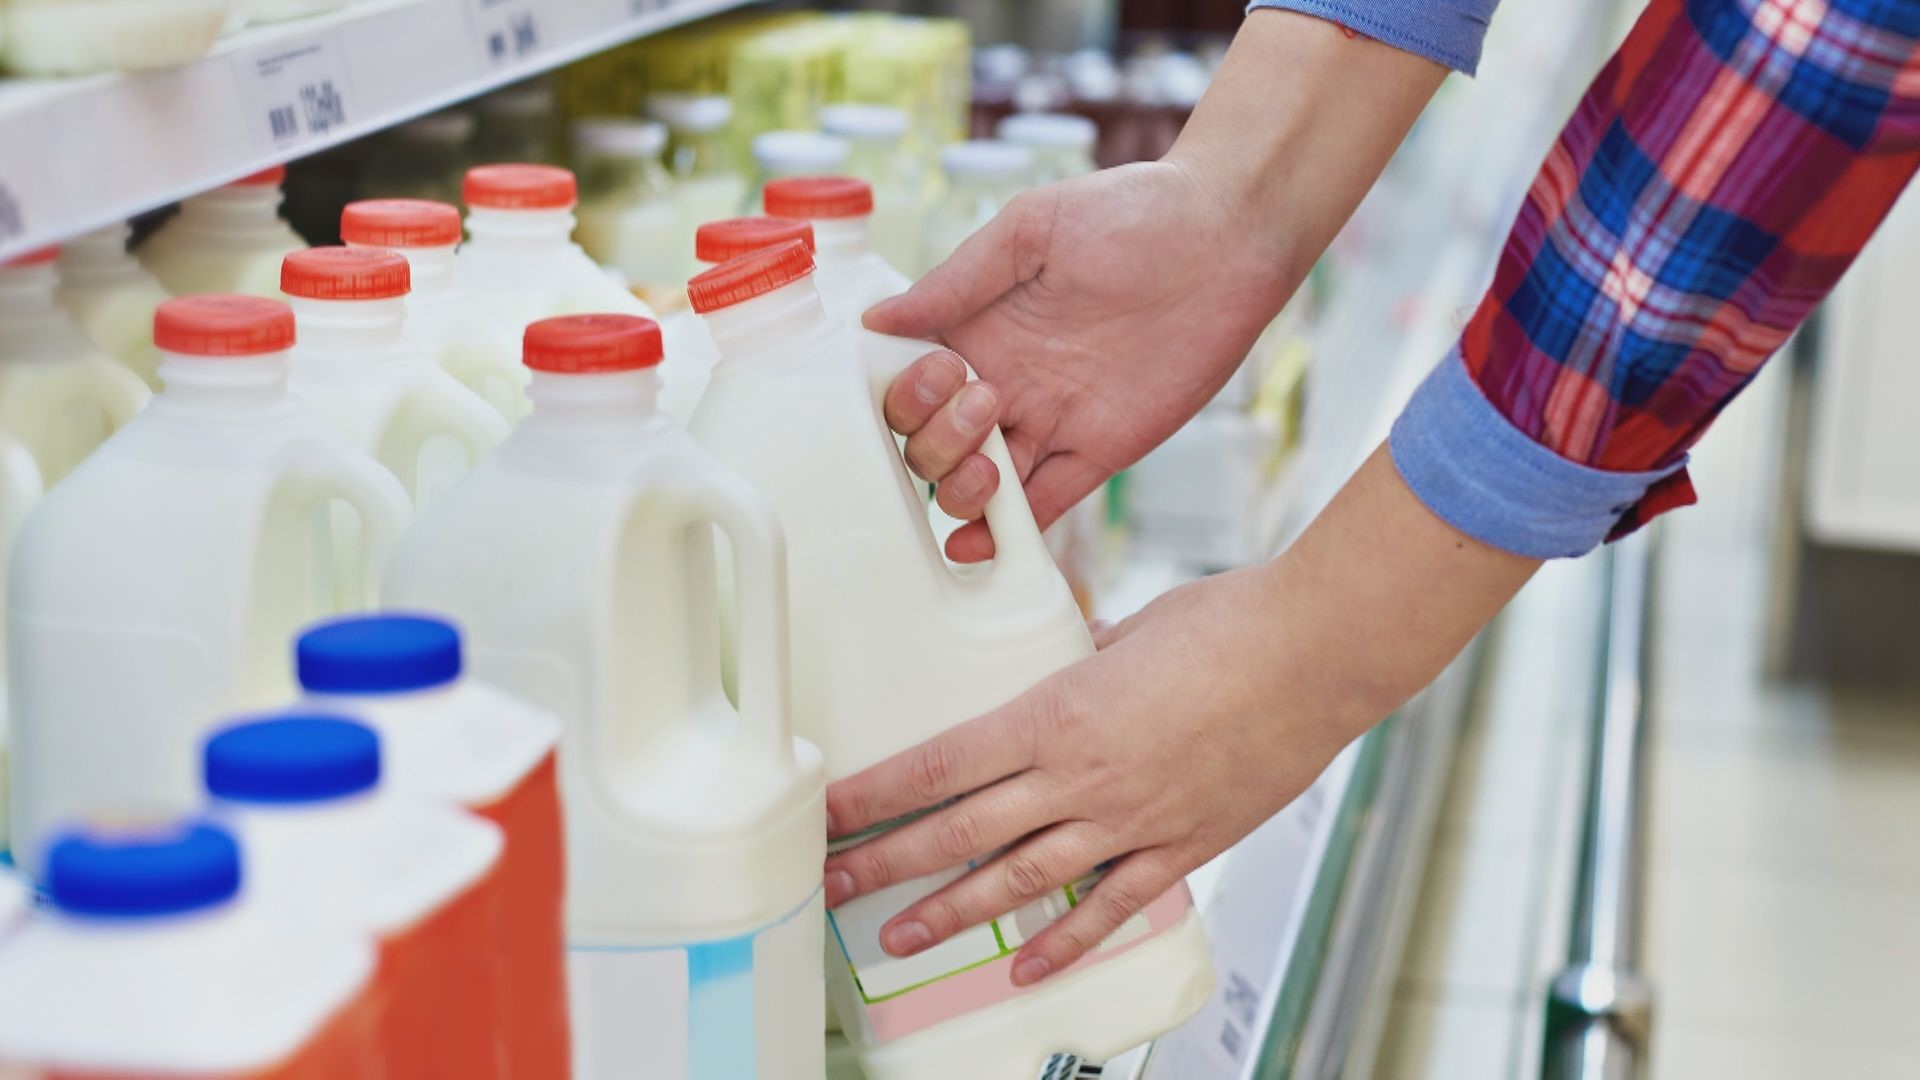 Choosing between the many sources of dairy and non-dairy milks is largely a matter of personal choice in terms of tolerance, goals, use, and preference.